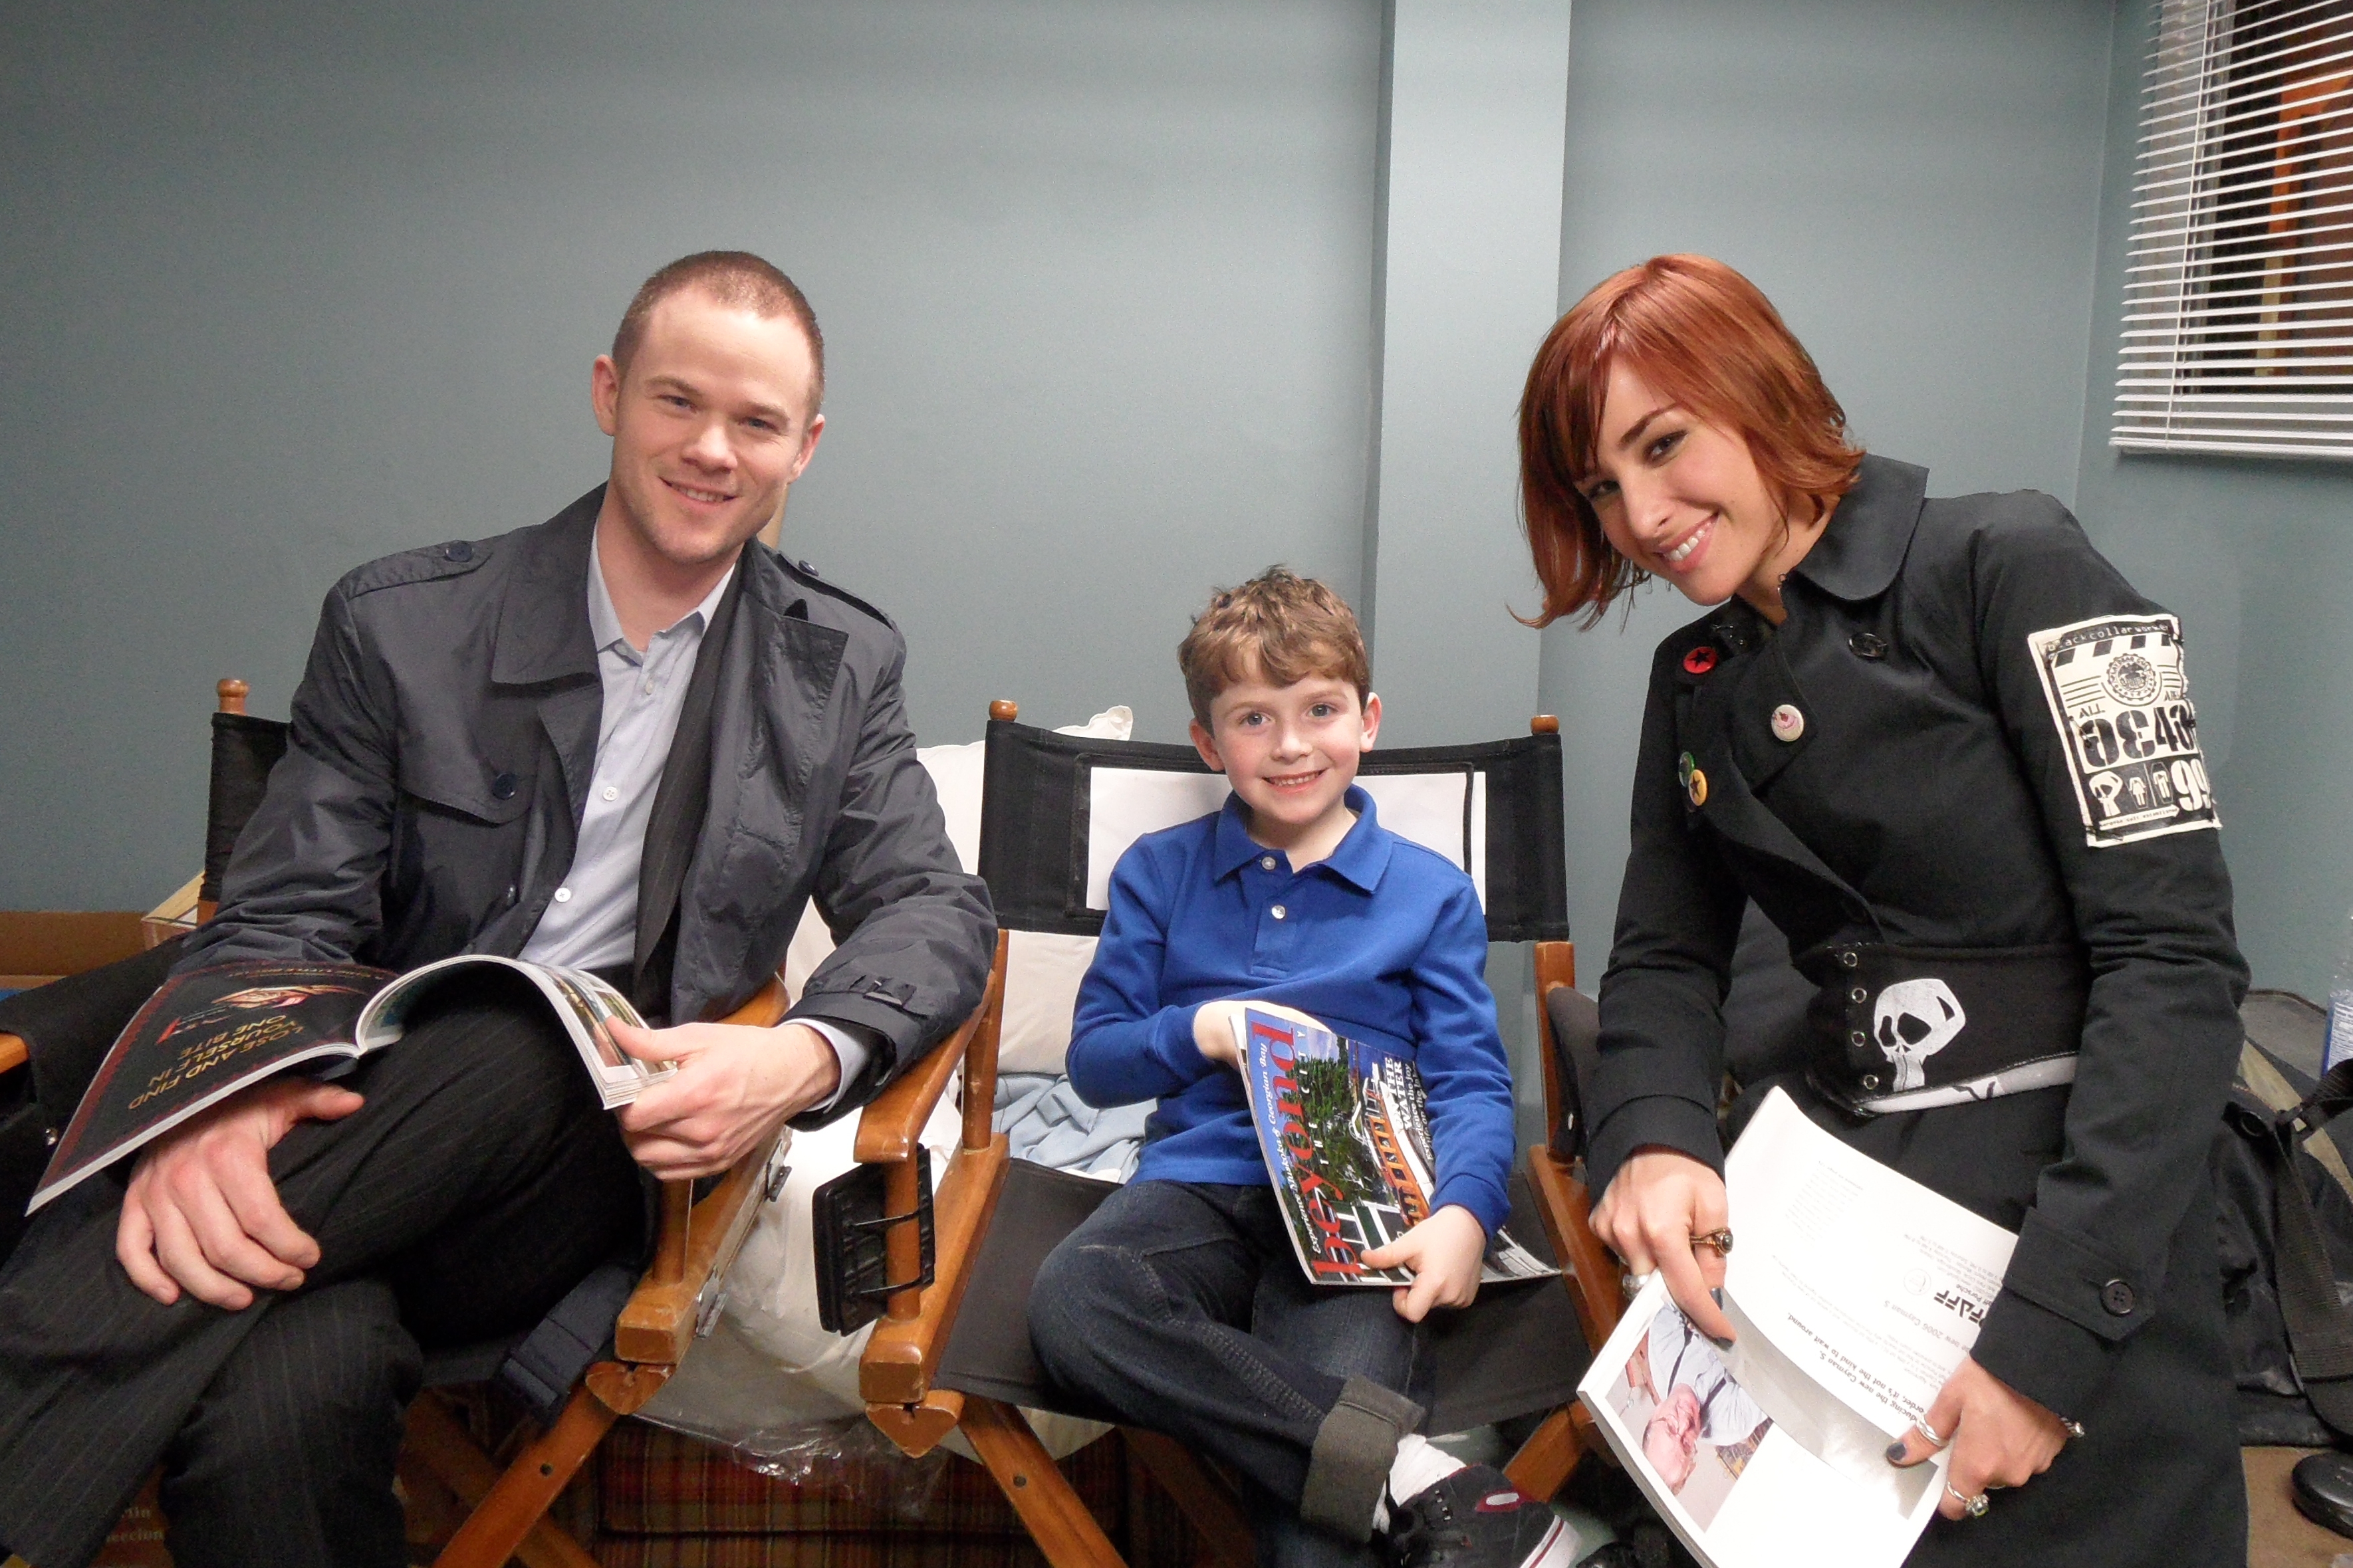 Warehouse 13 (TV series) - on set with Allison Scagliotti and Aaron Ashmore Feb. 2011